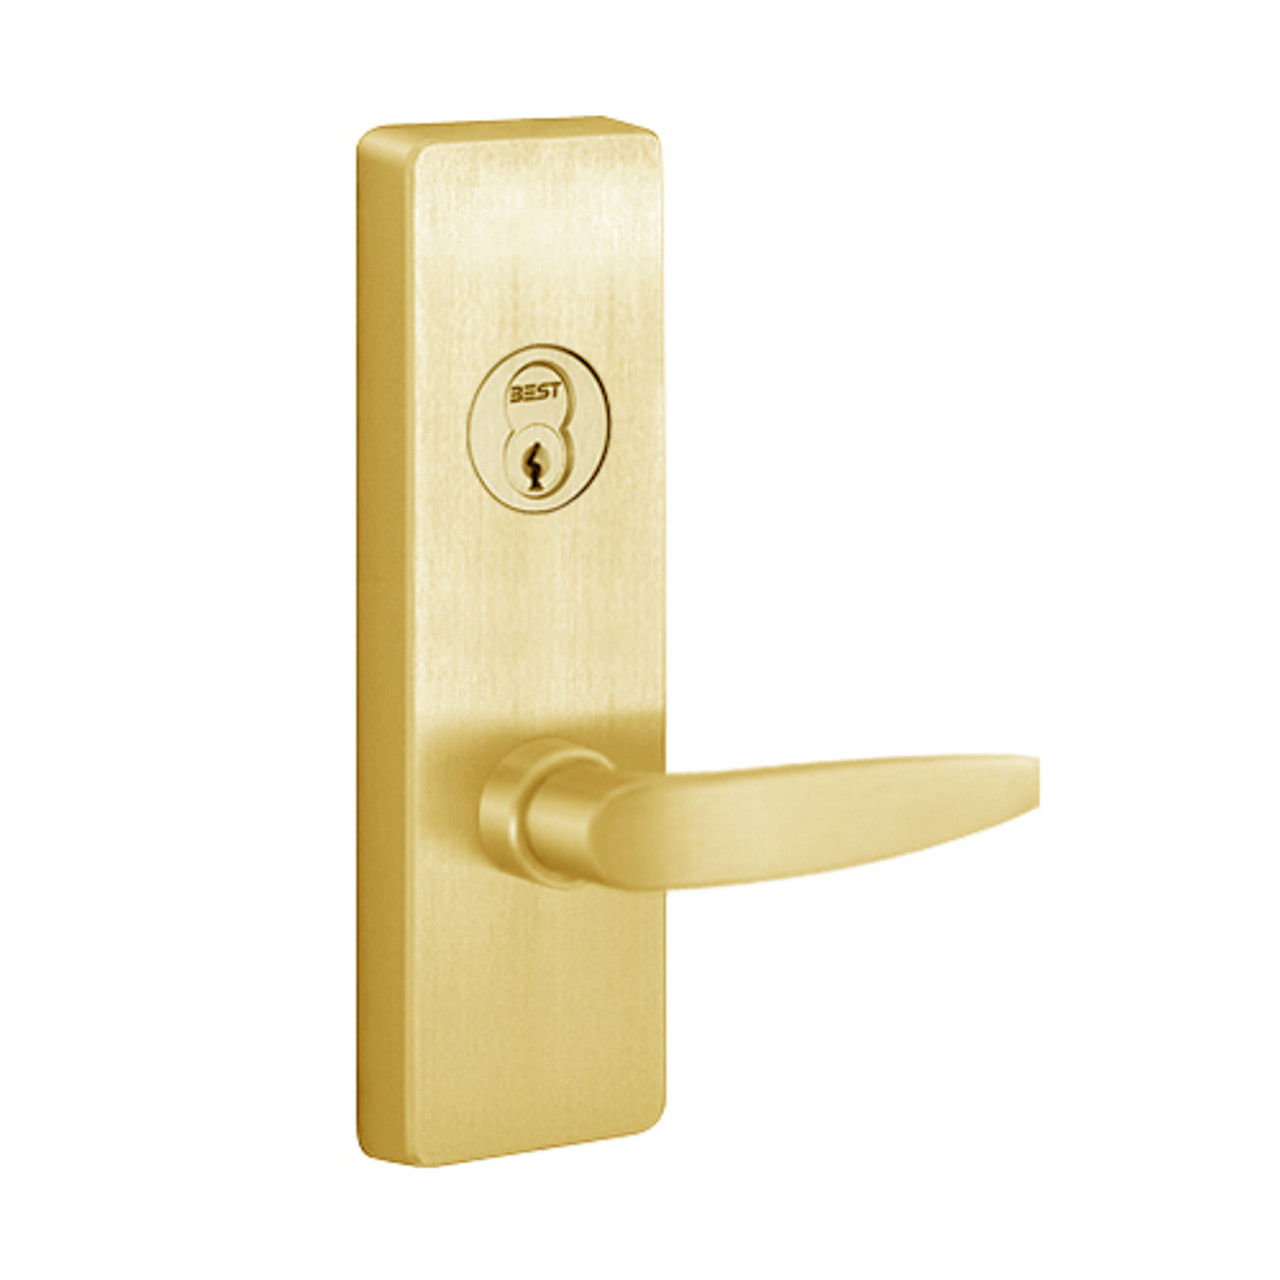 VM4908B-605-RHR PHI Key Controls Lever Vandal Resistant Trim with B Lever Design for Apex and Olympian Series Exit Device in Bright Brass Finish